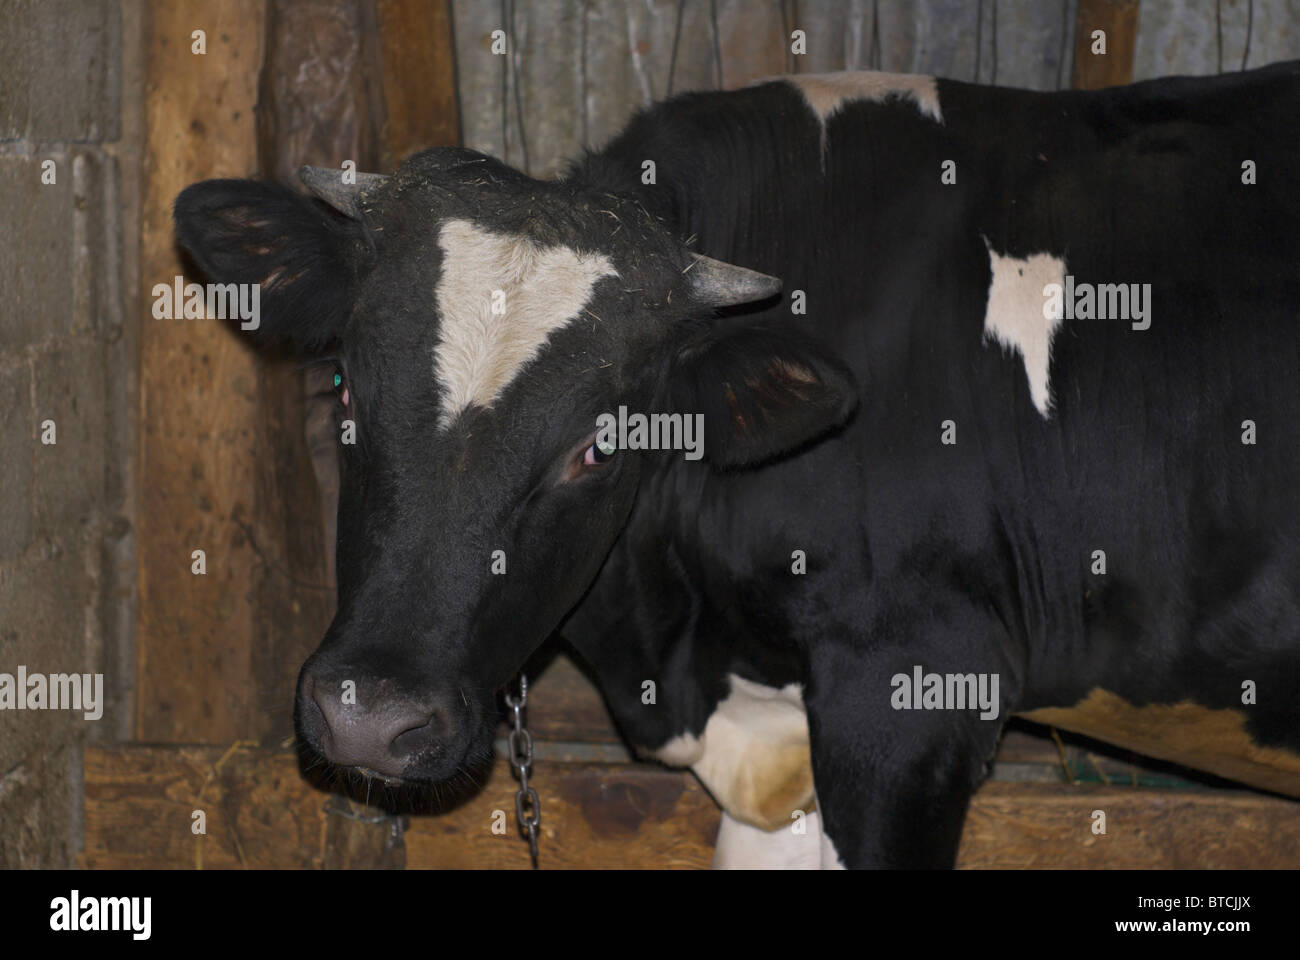 Close-up of sad looking calf in cattle shed Stock Photo